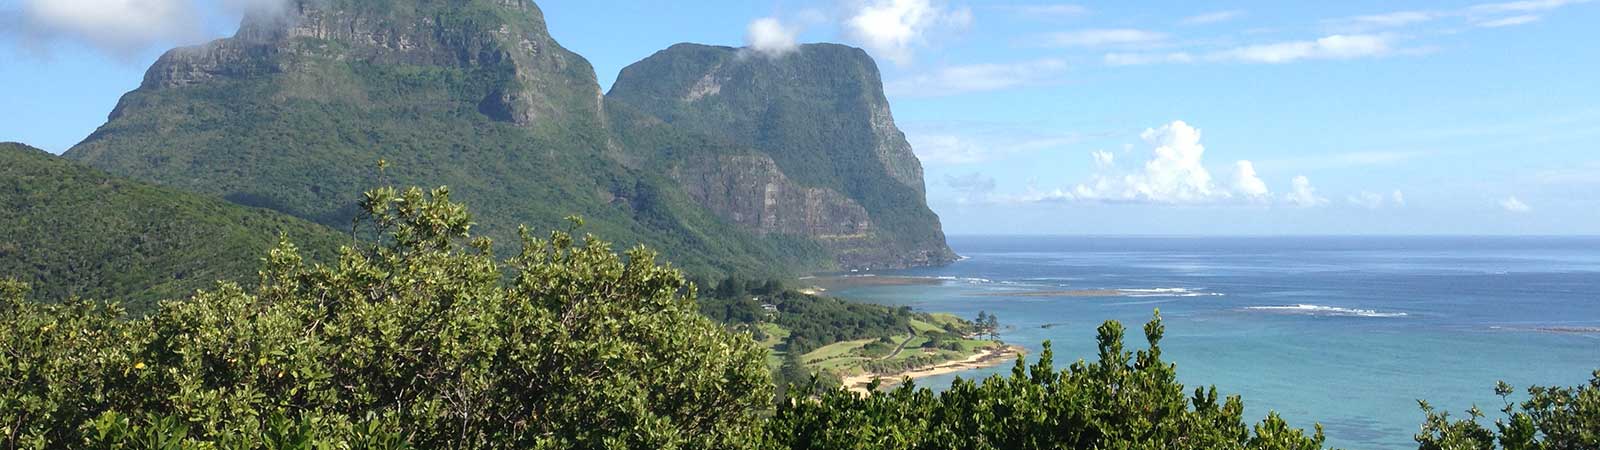 View from a look out of the large cliffs and the ocean at Lord Howe Island